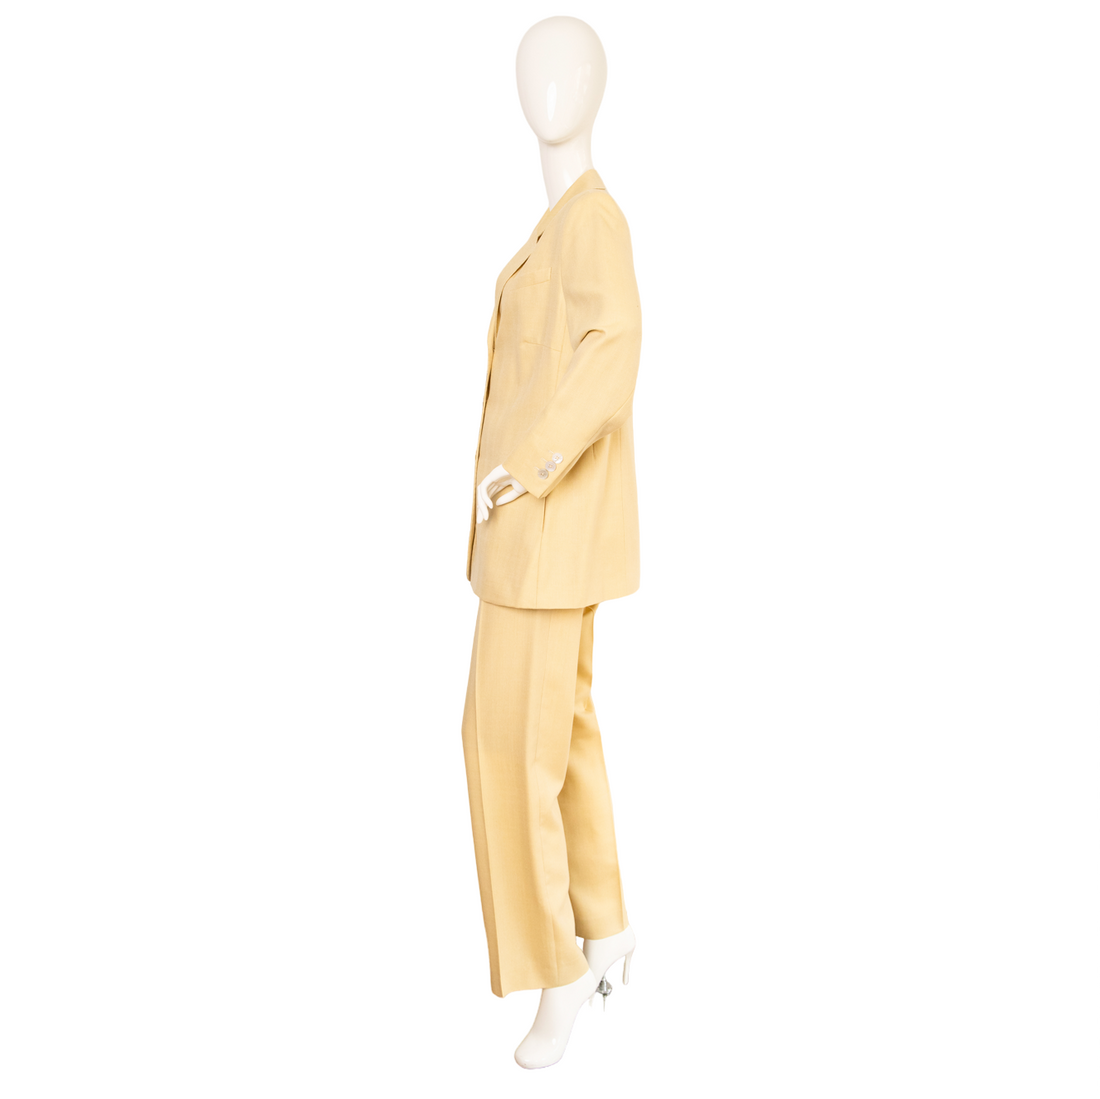 Roberto Quaglia trouser suit with matching skirt